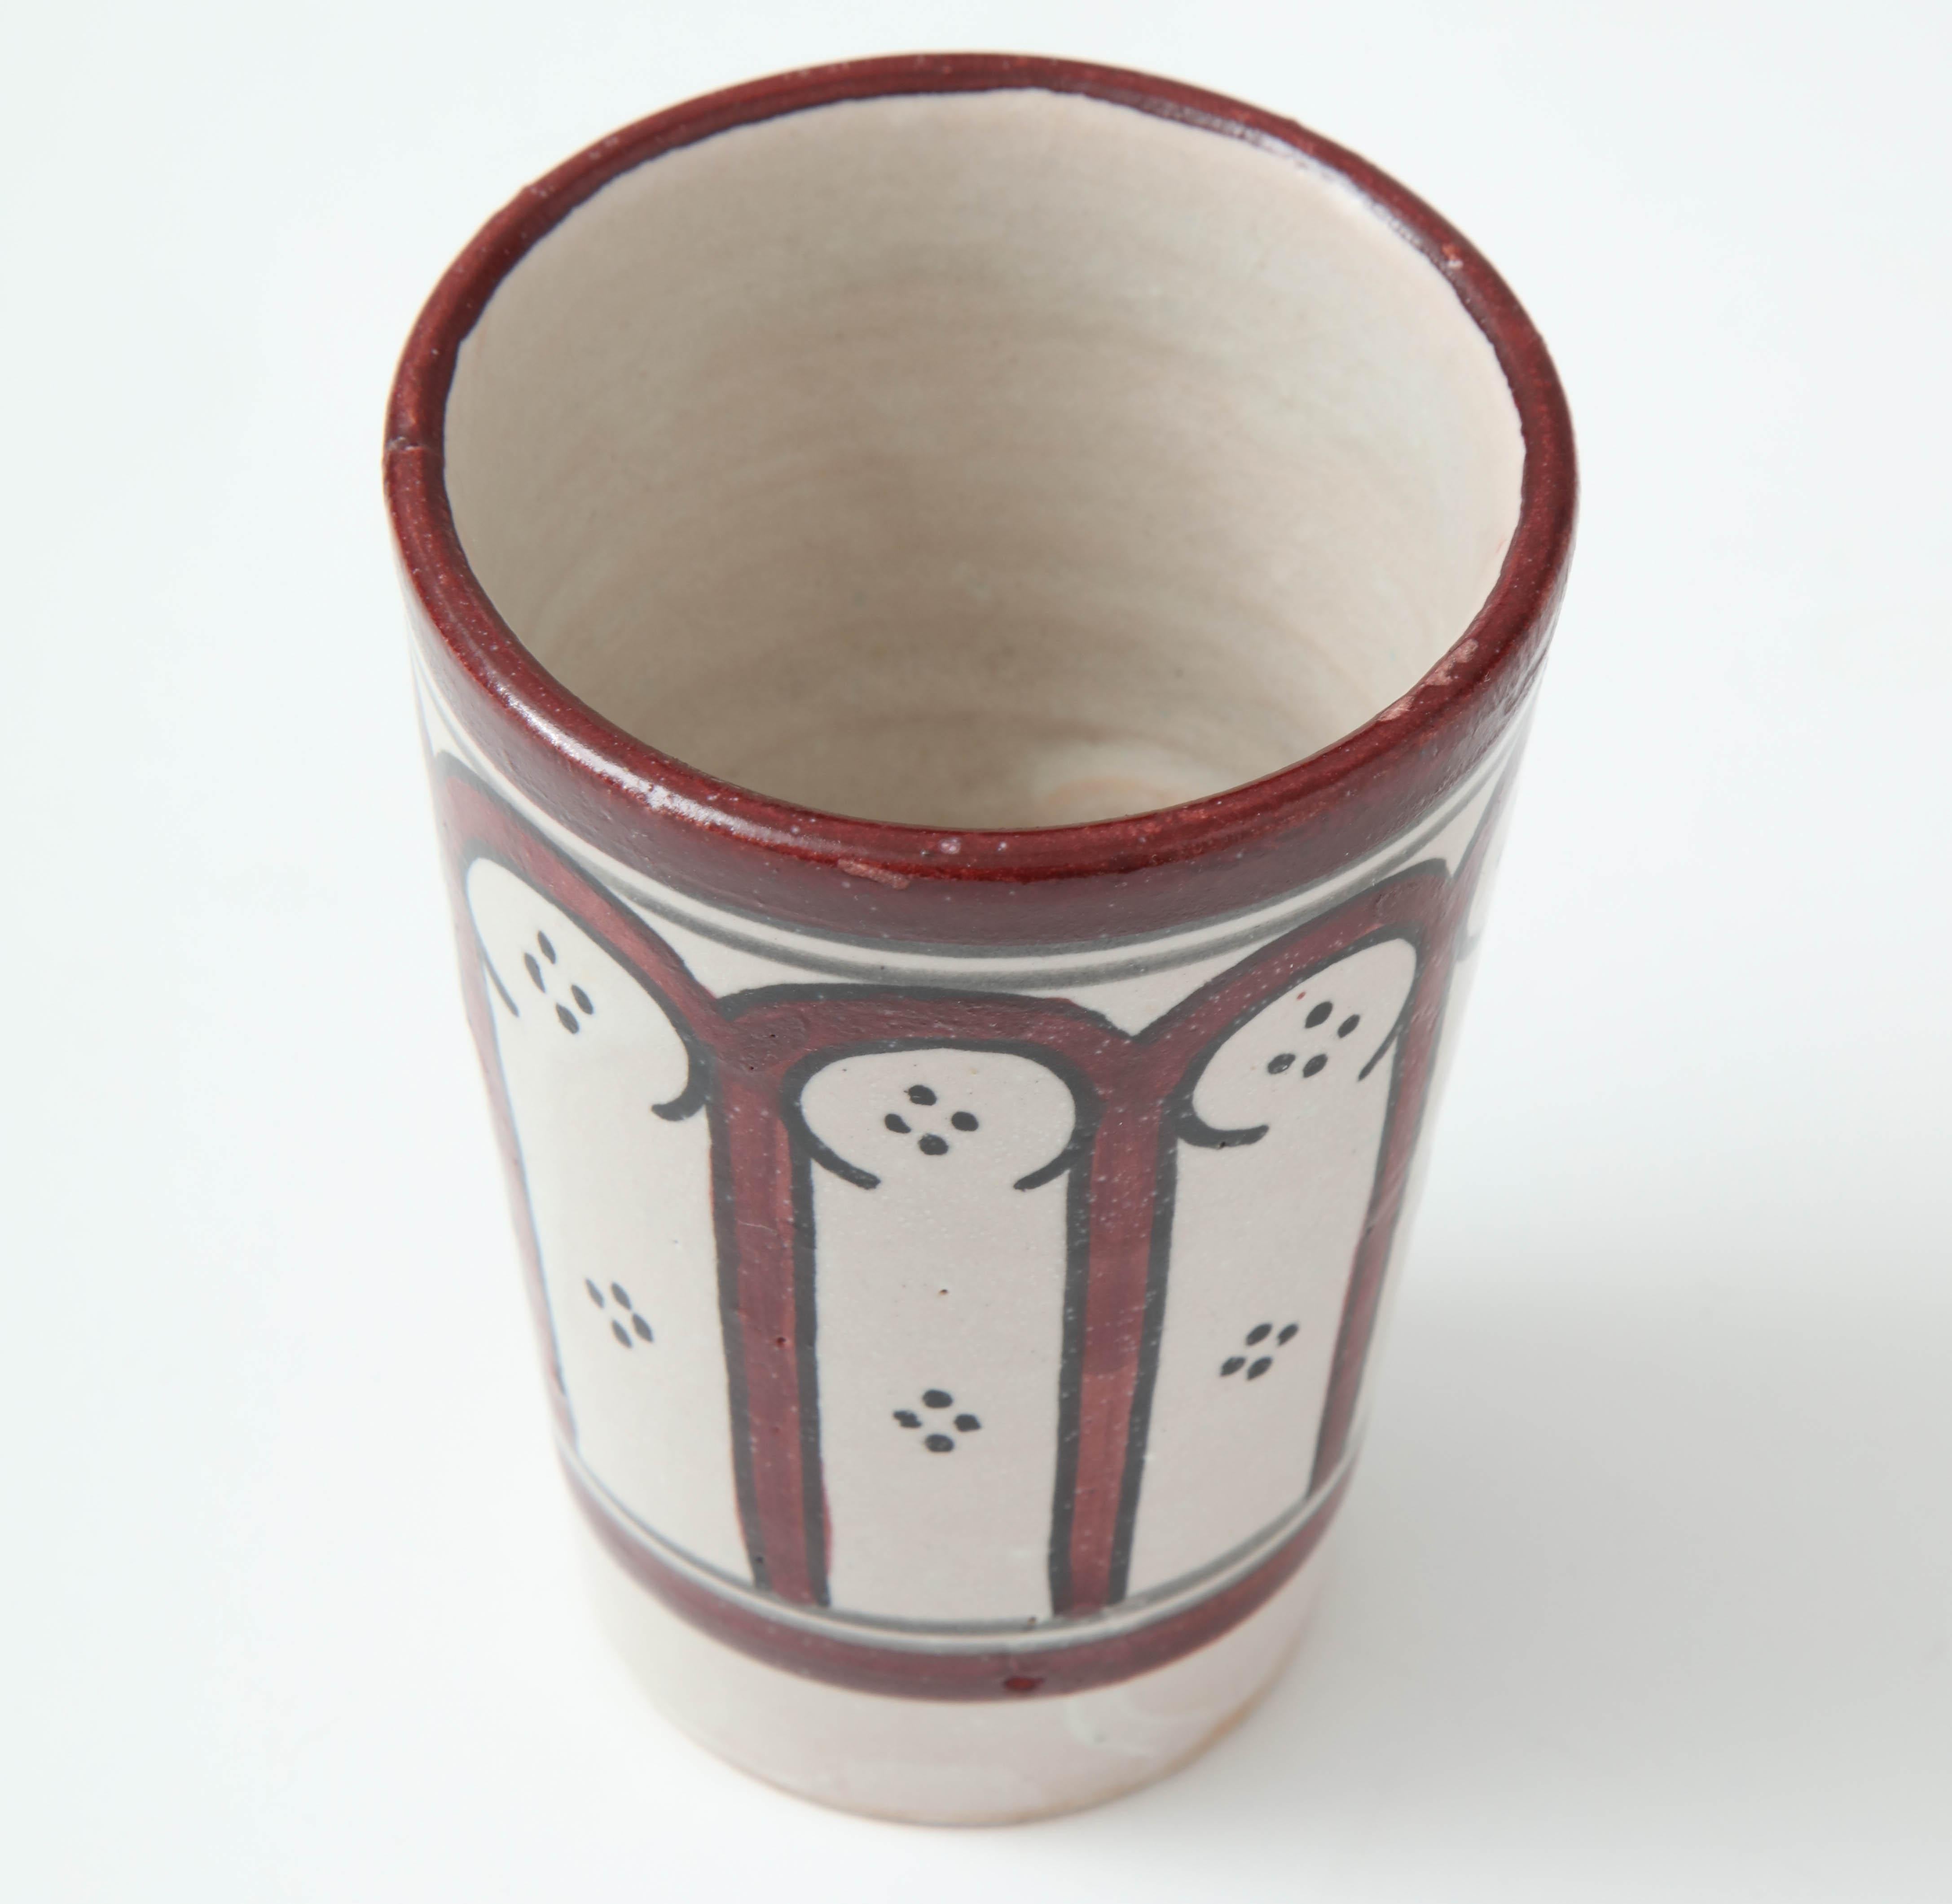 Hand-Crafted Ceramic Vessel, Red and Cream Color, Handcrafted